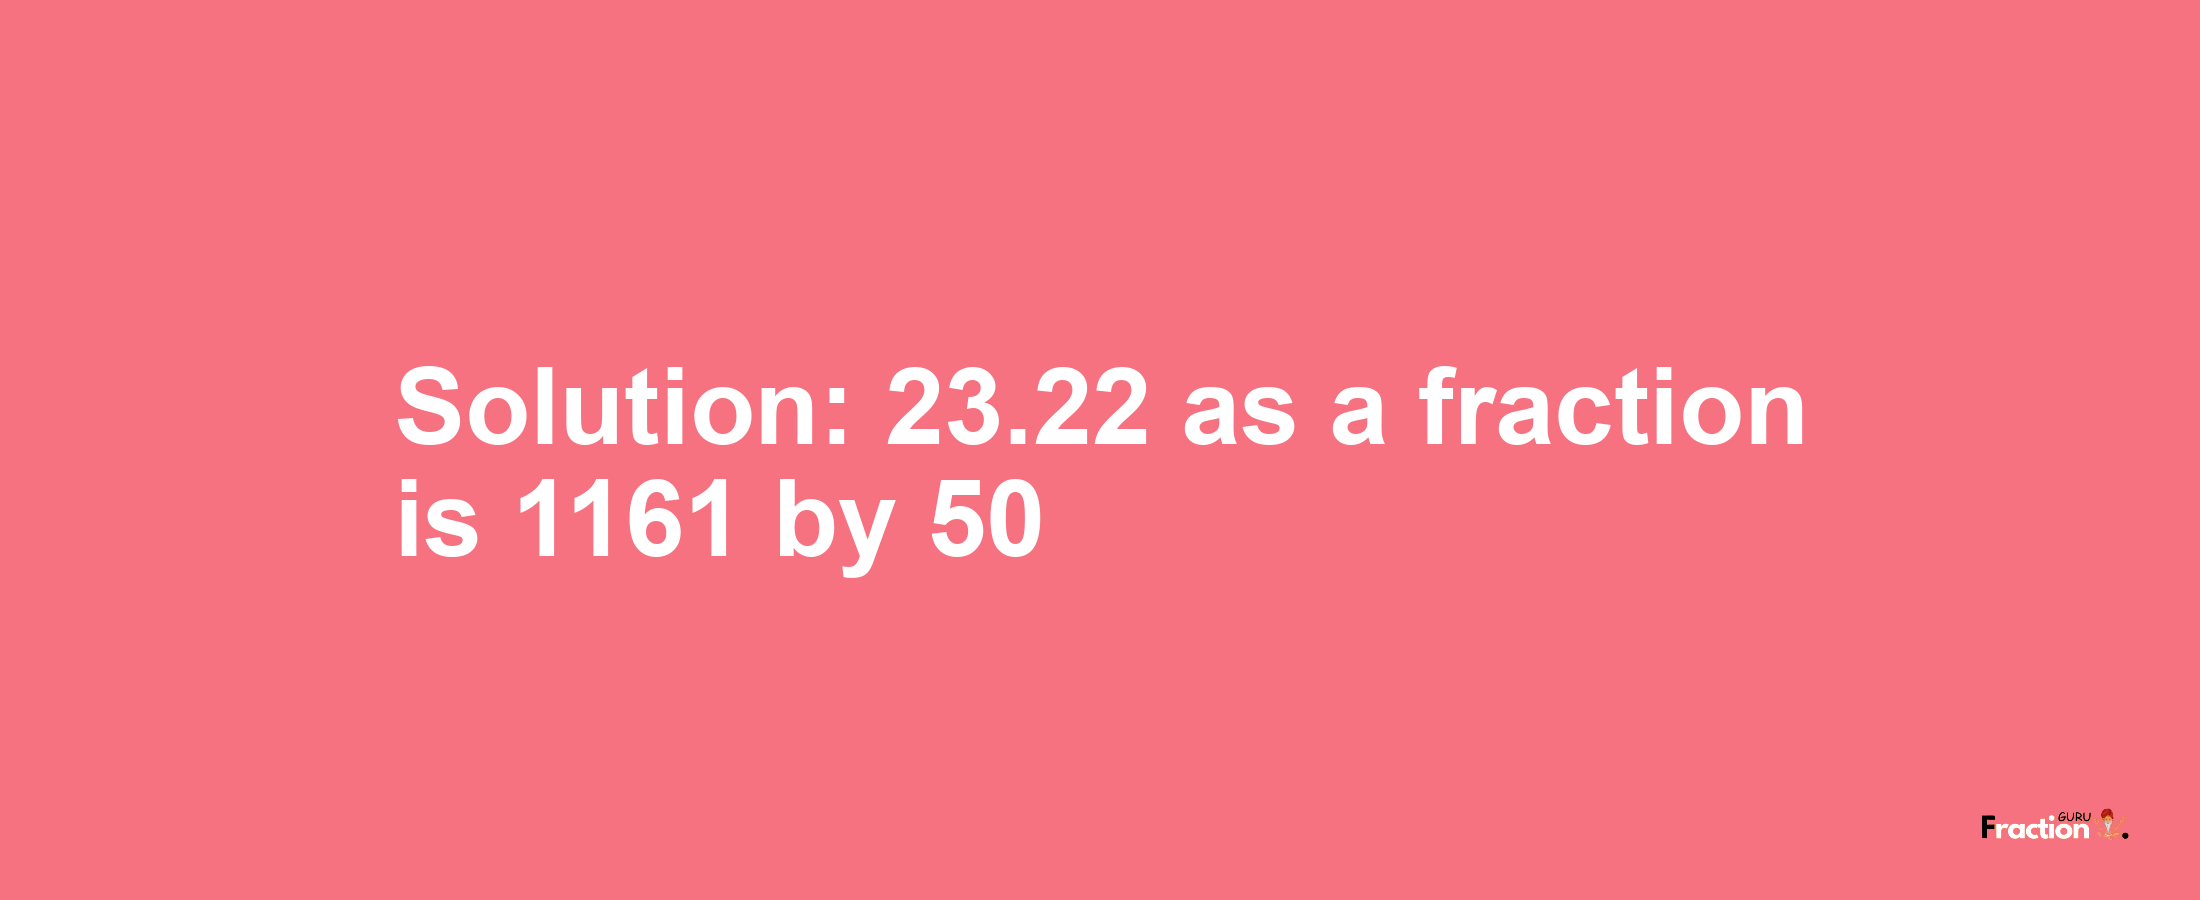 Solution:23.22 as a fraction is 1161/50